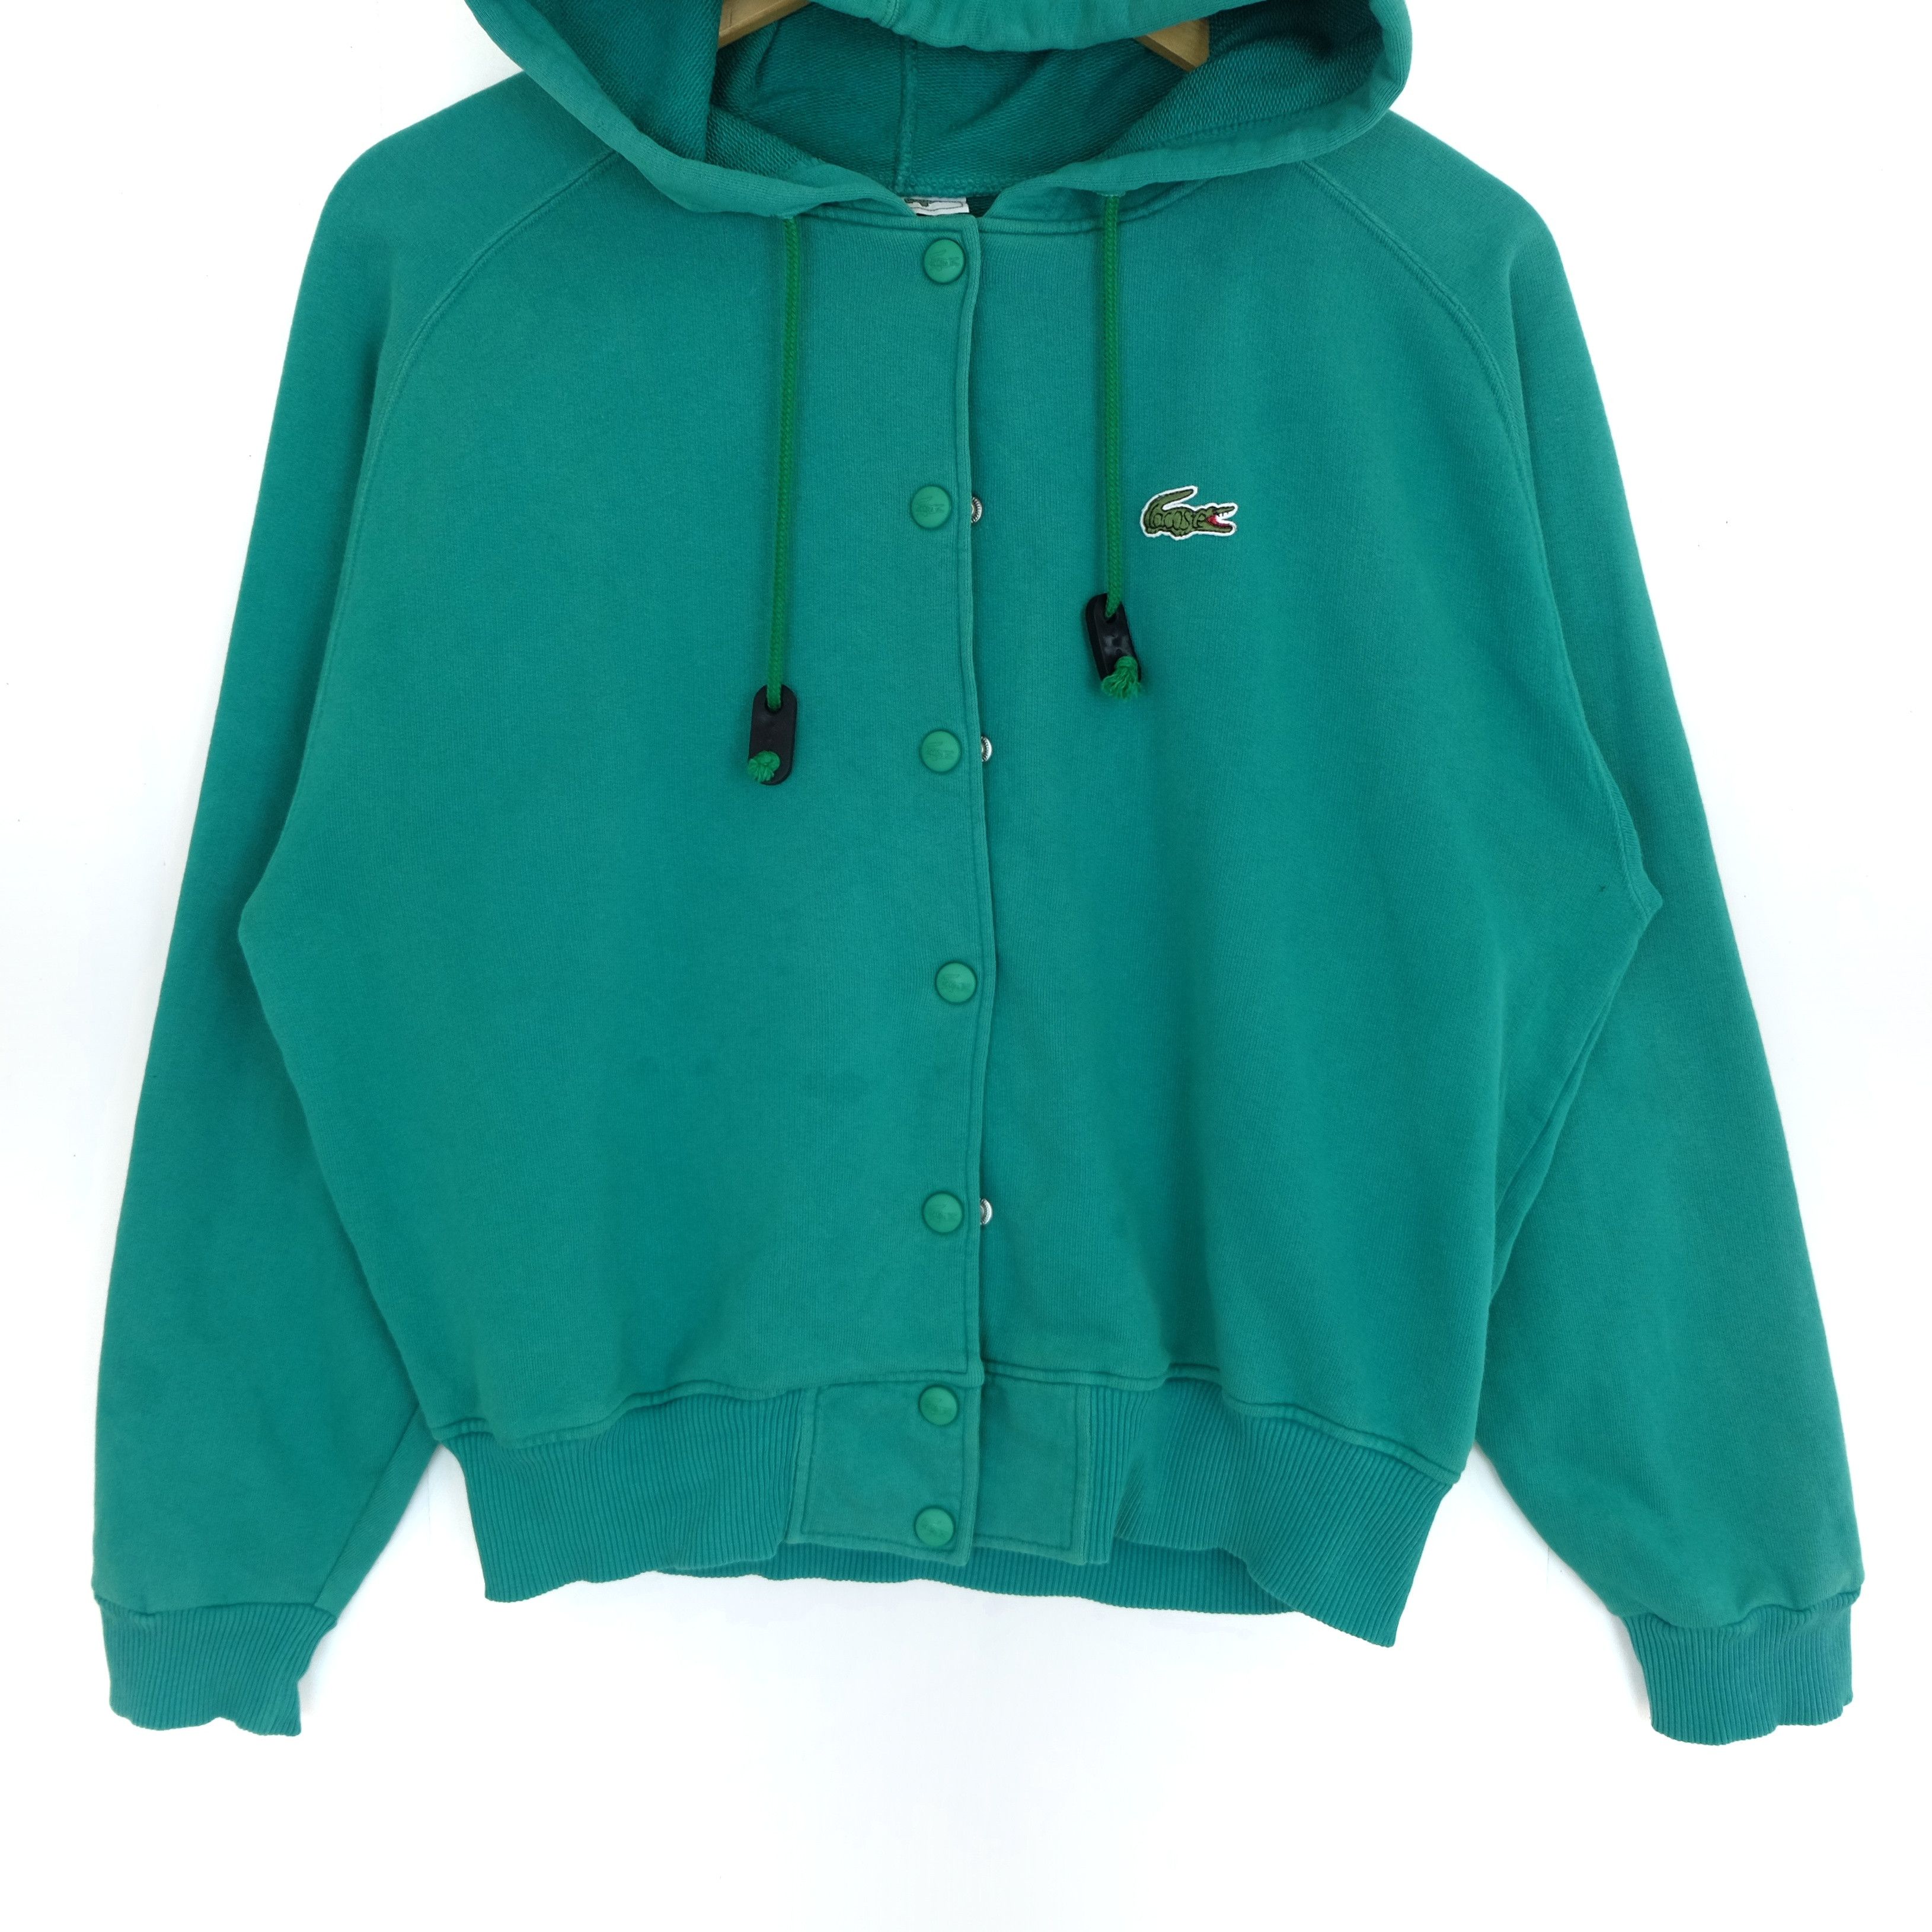 Lacoste LACOSTE Big Spell Out Logo Hoodie Size XL / US 12-14 / IT 48-50 - 2 Preview